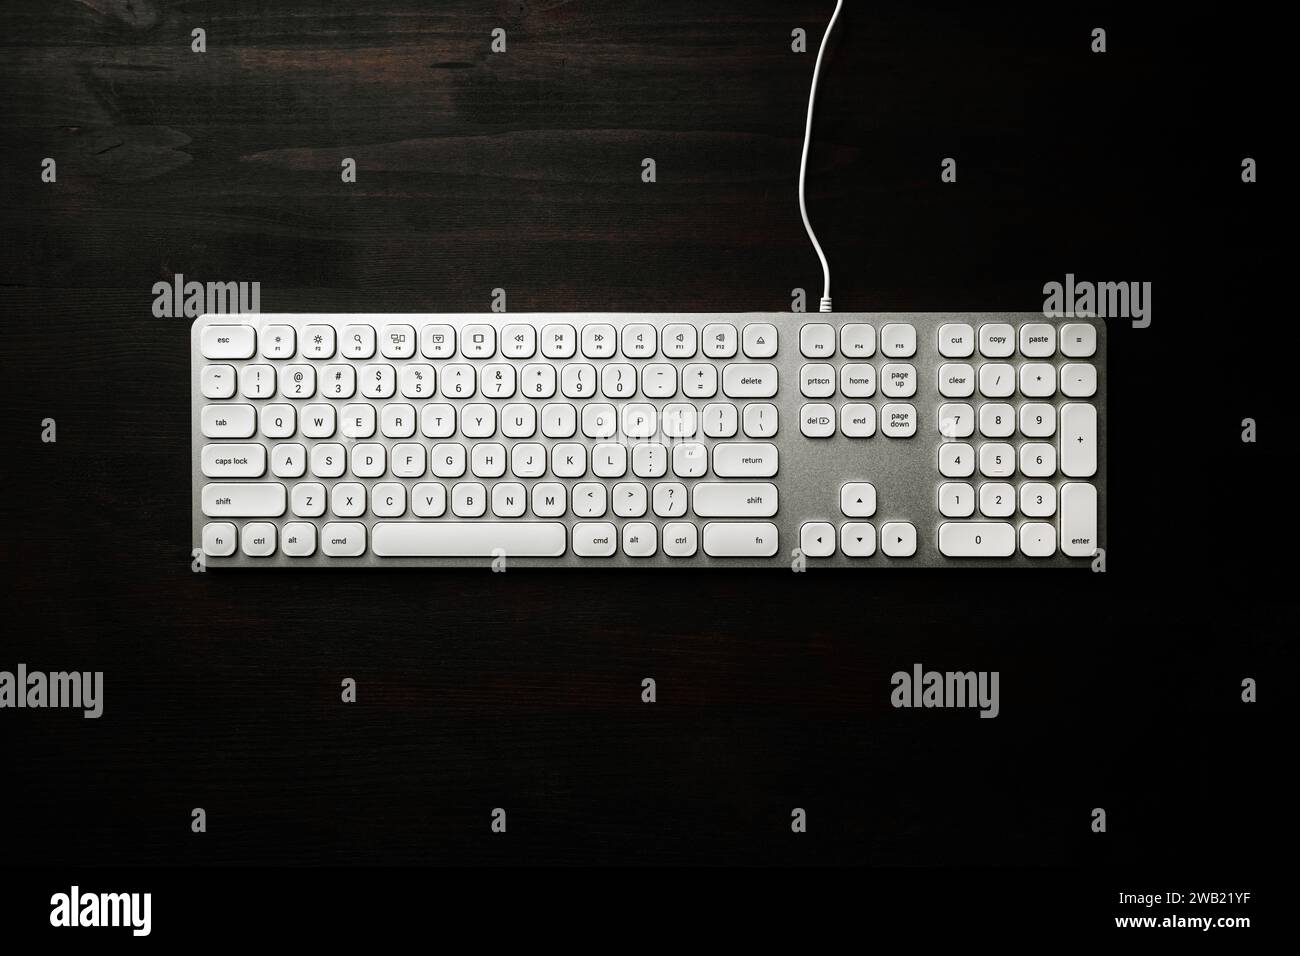 Top view of white computer keyboard on black office desk, copy space included Stock Photo